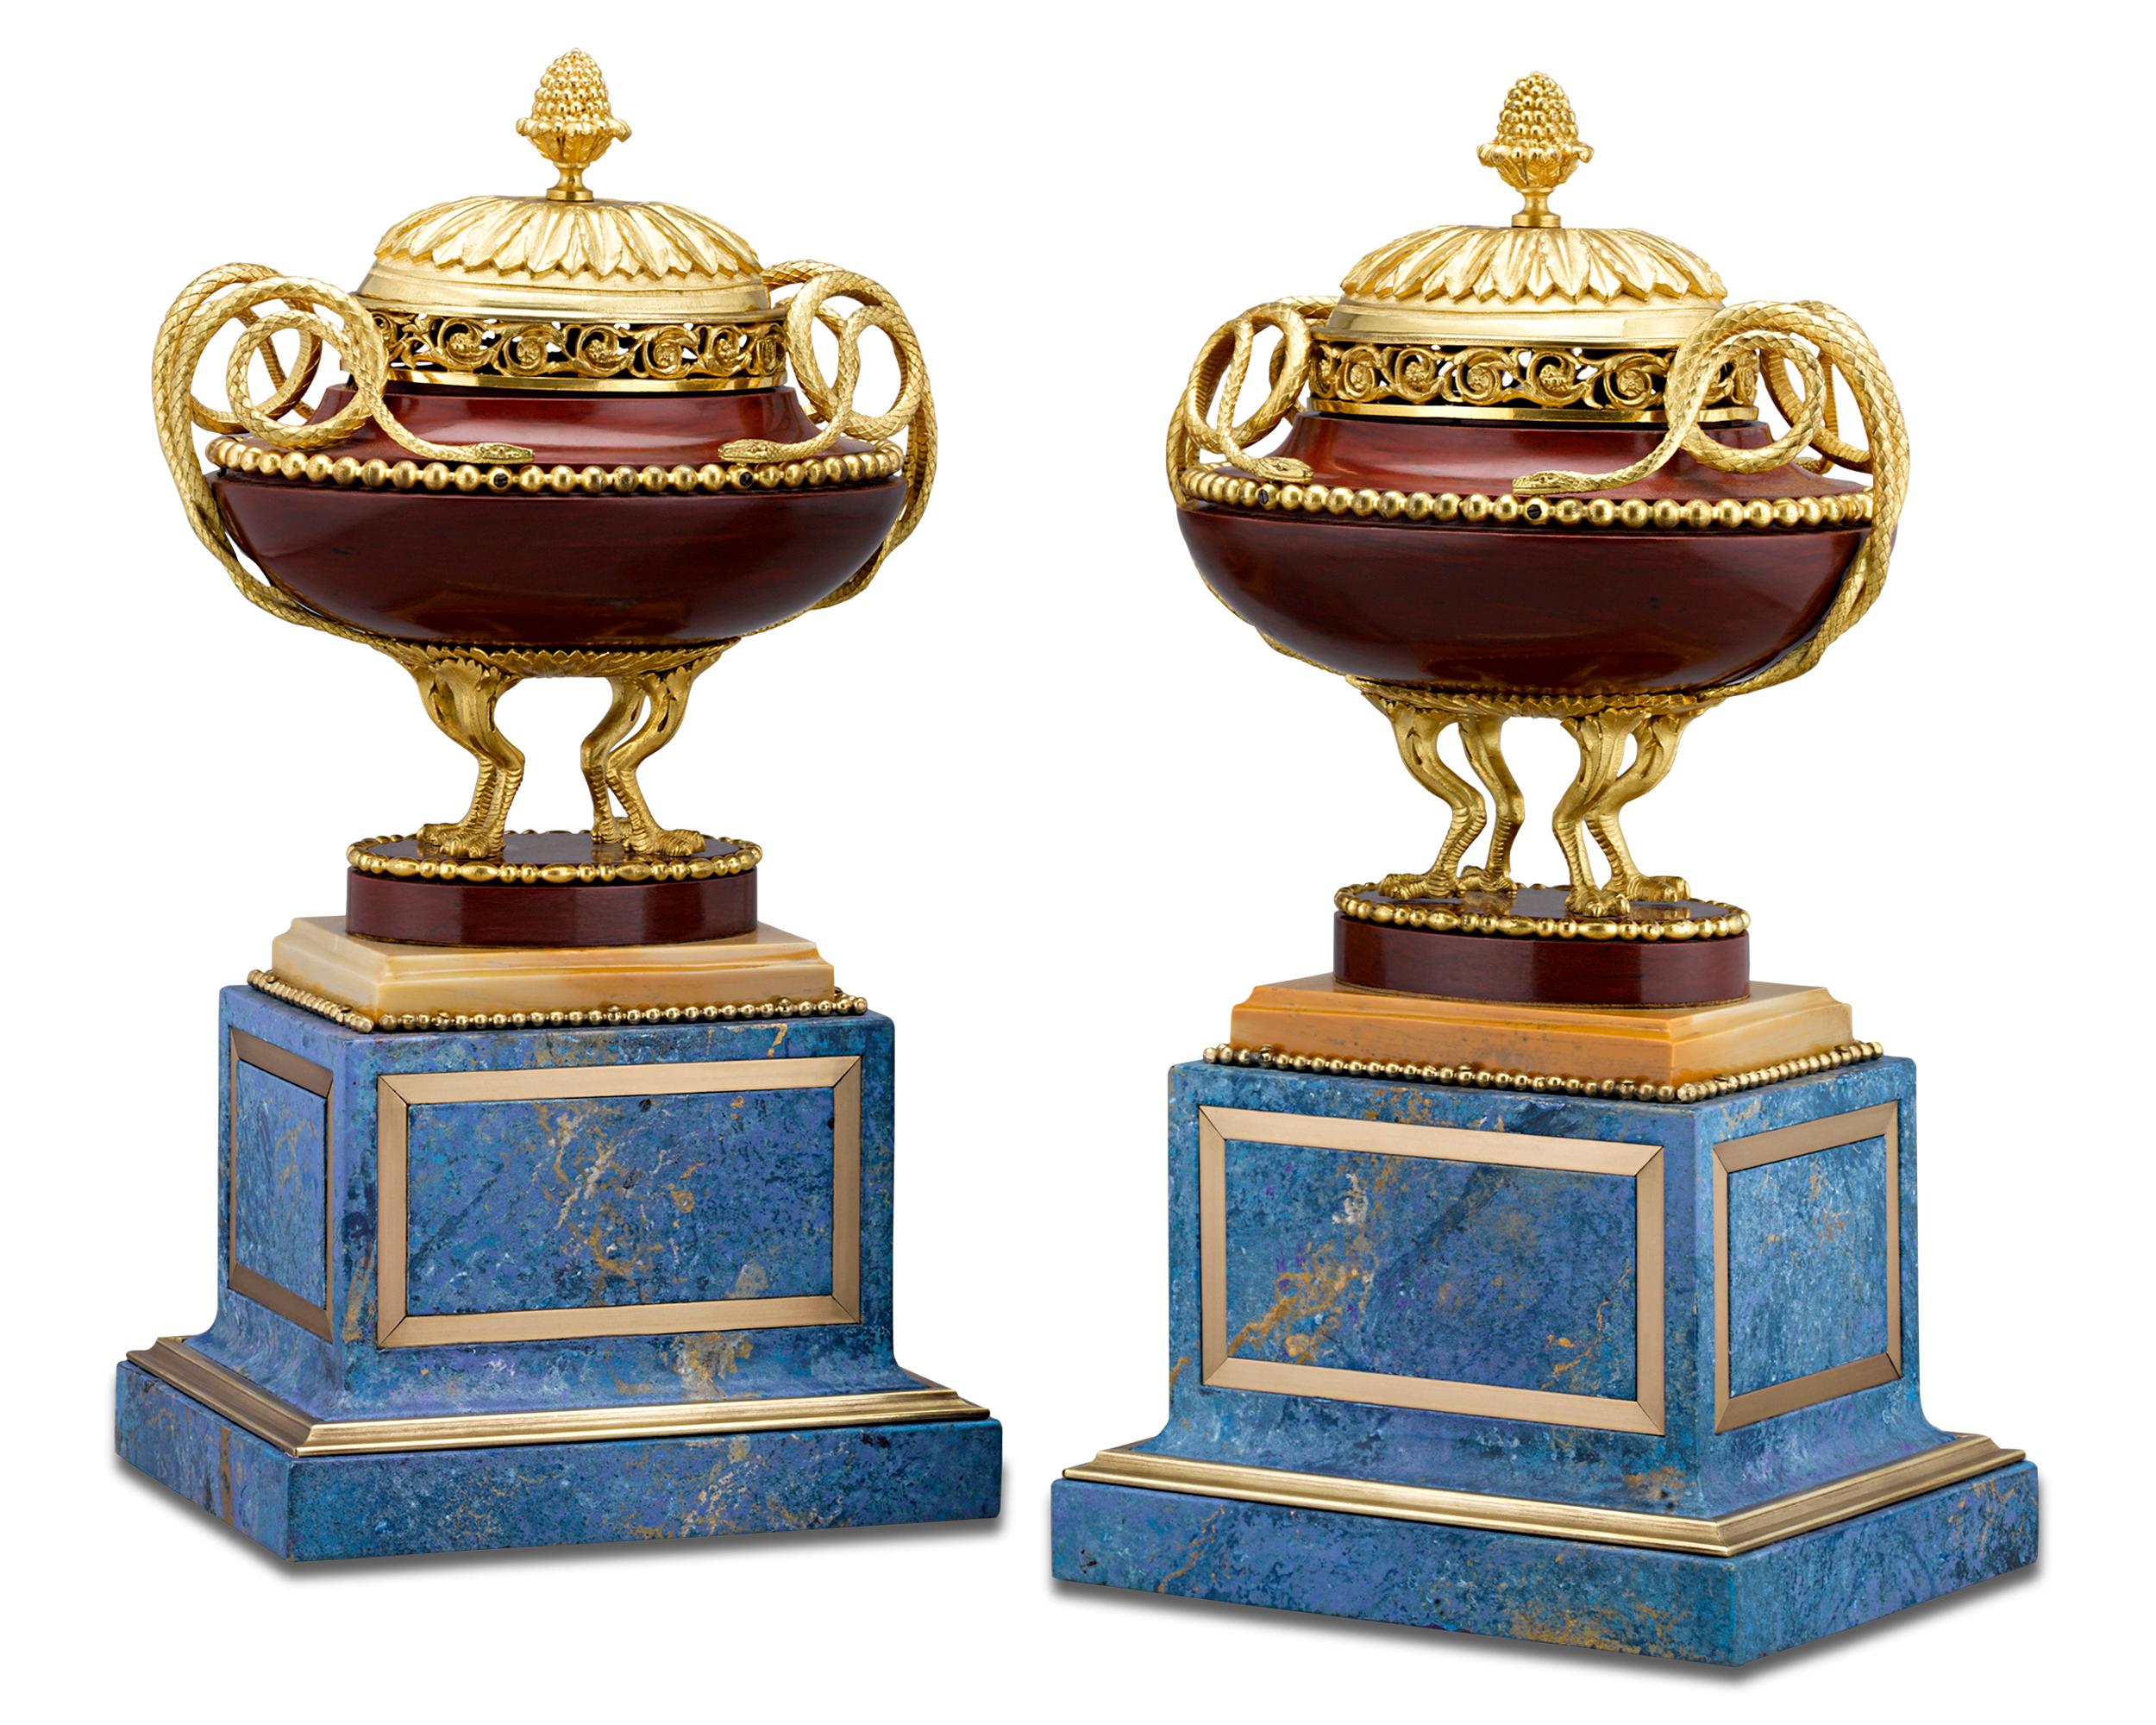 This exquisite pair of rosso antico marble and gilt bronze potpourri vases epitomize opulent artistry. A popular material for sculpture in ancient Greece, Rome and Italy, rosso antico is identifiable by its pink to reddish hue. These vases exhibit